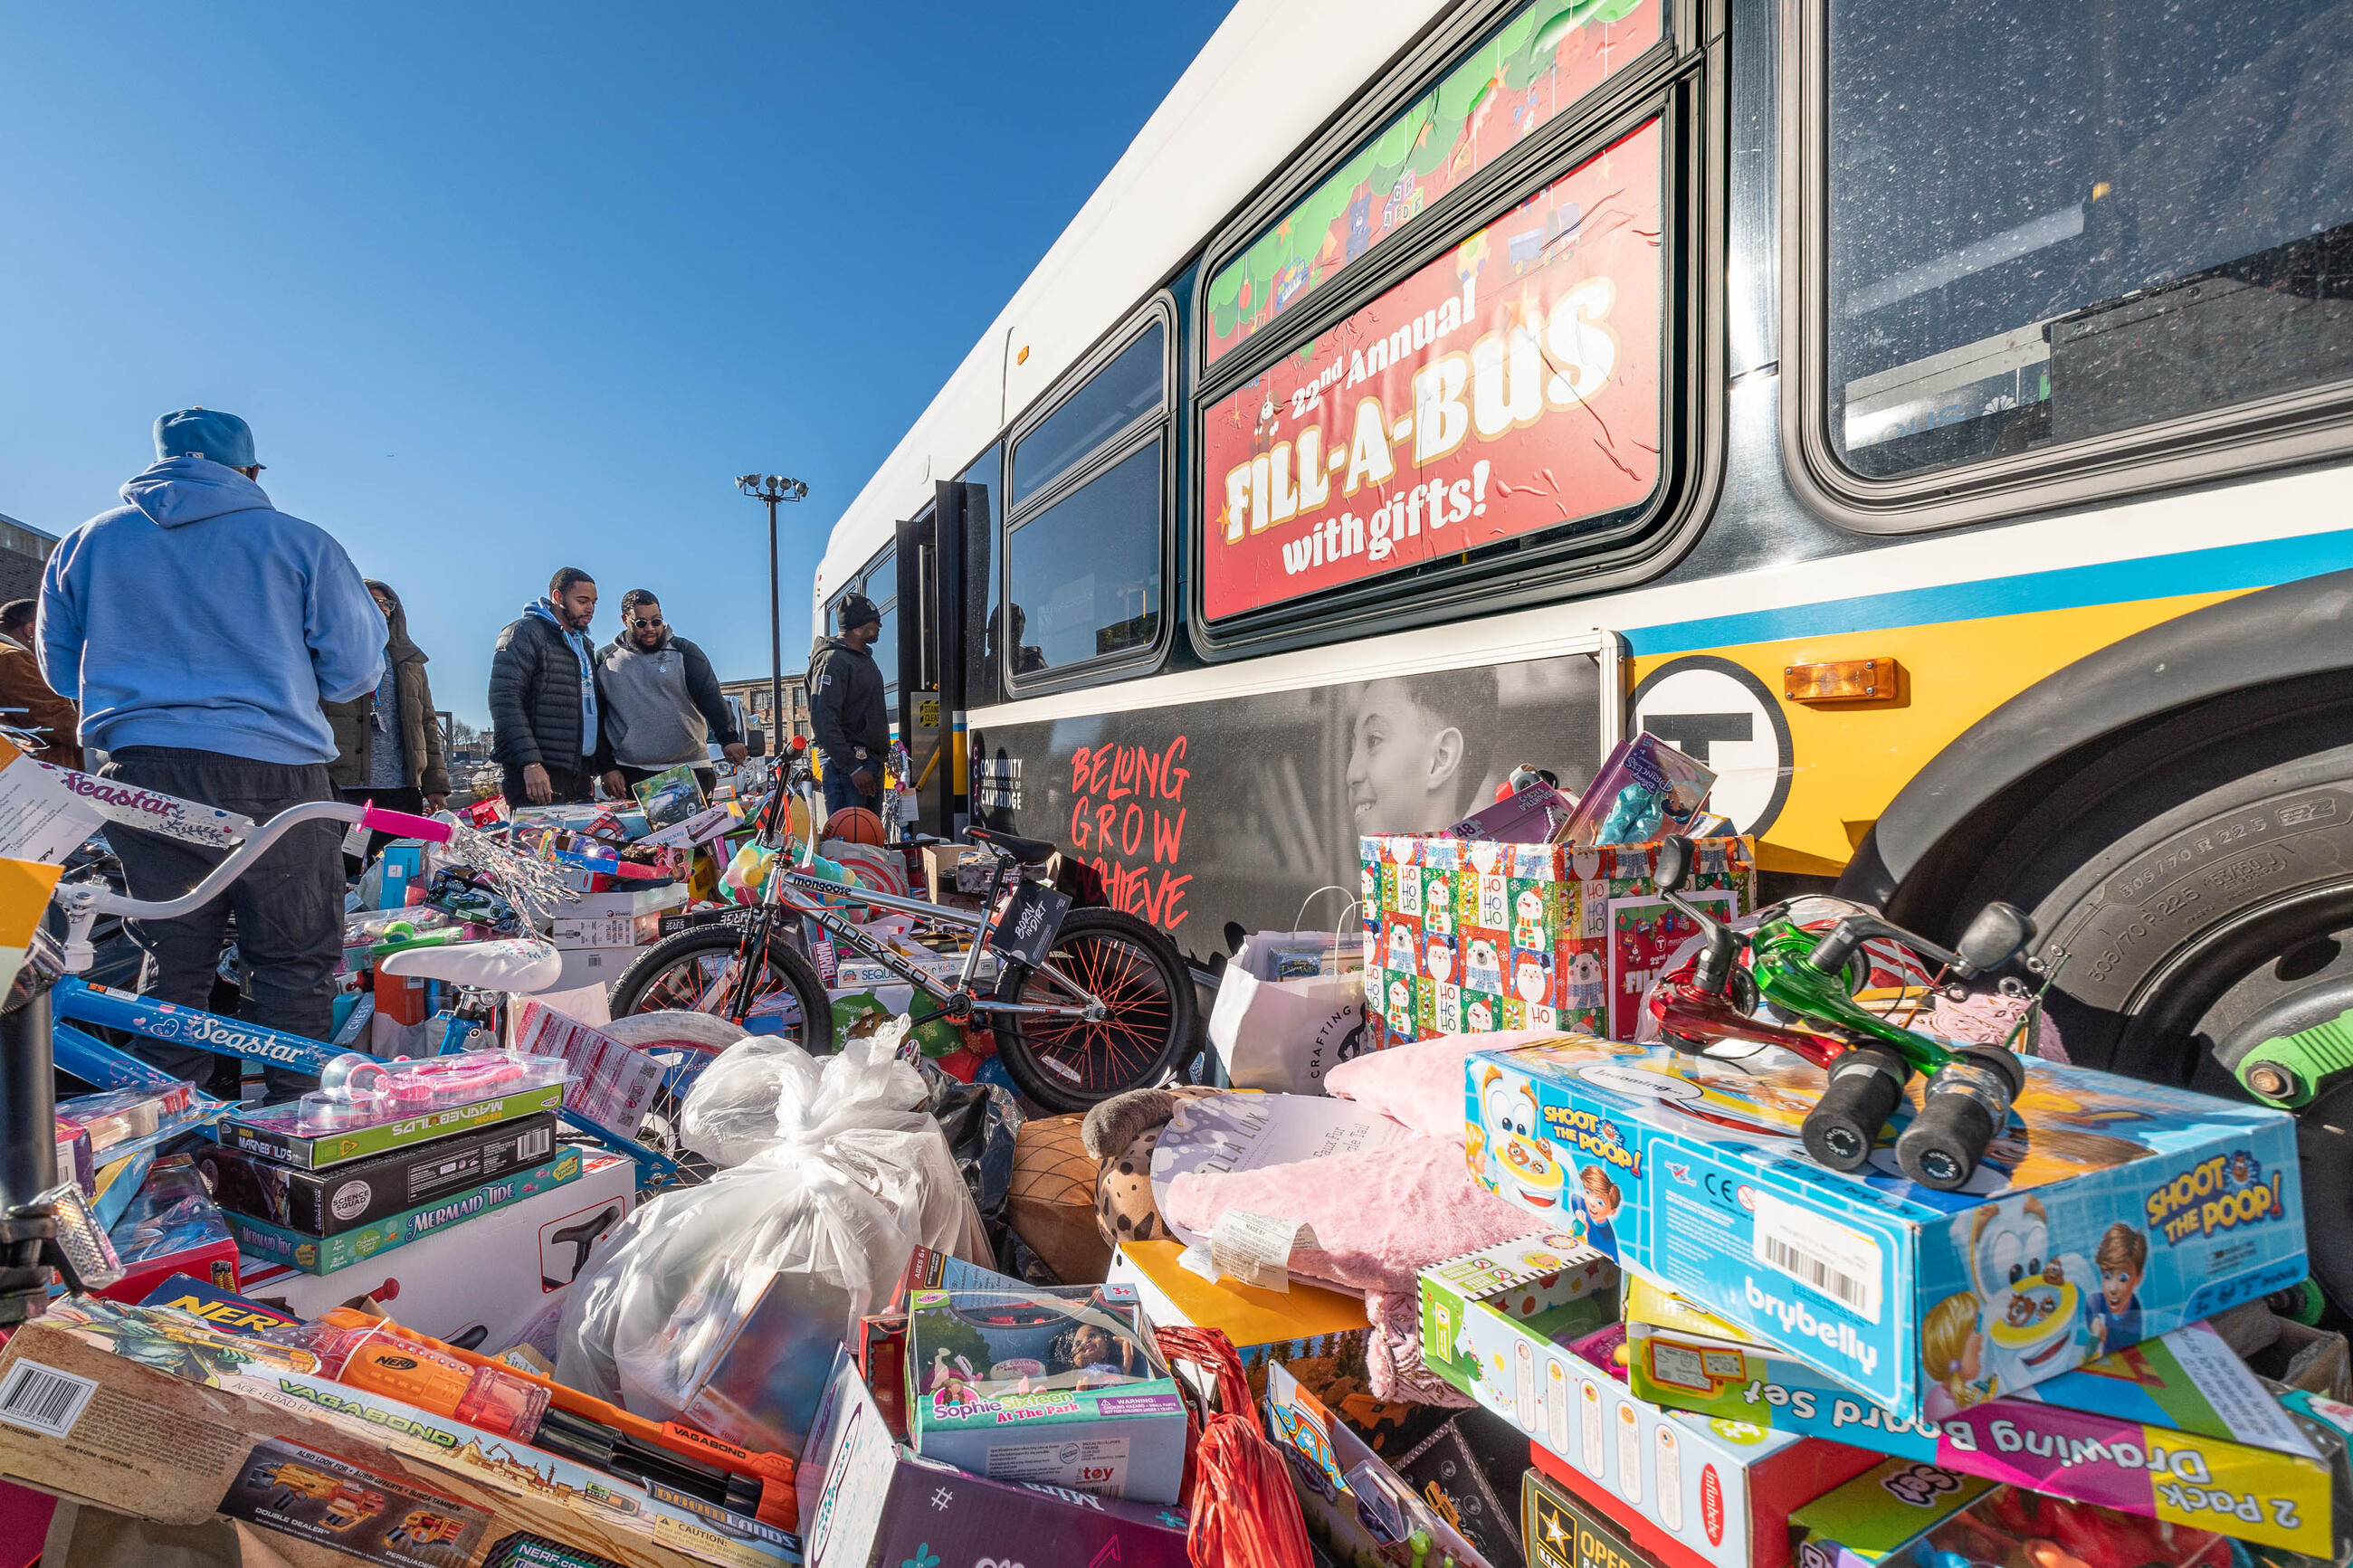 The gifts donated this week will benefit the MSPCC, the Boys and Girls Club of Boston, and Heading Home.